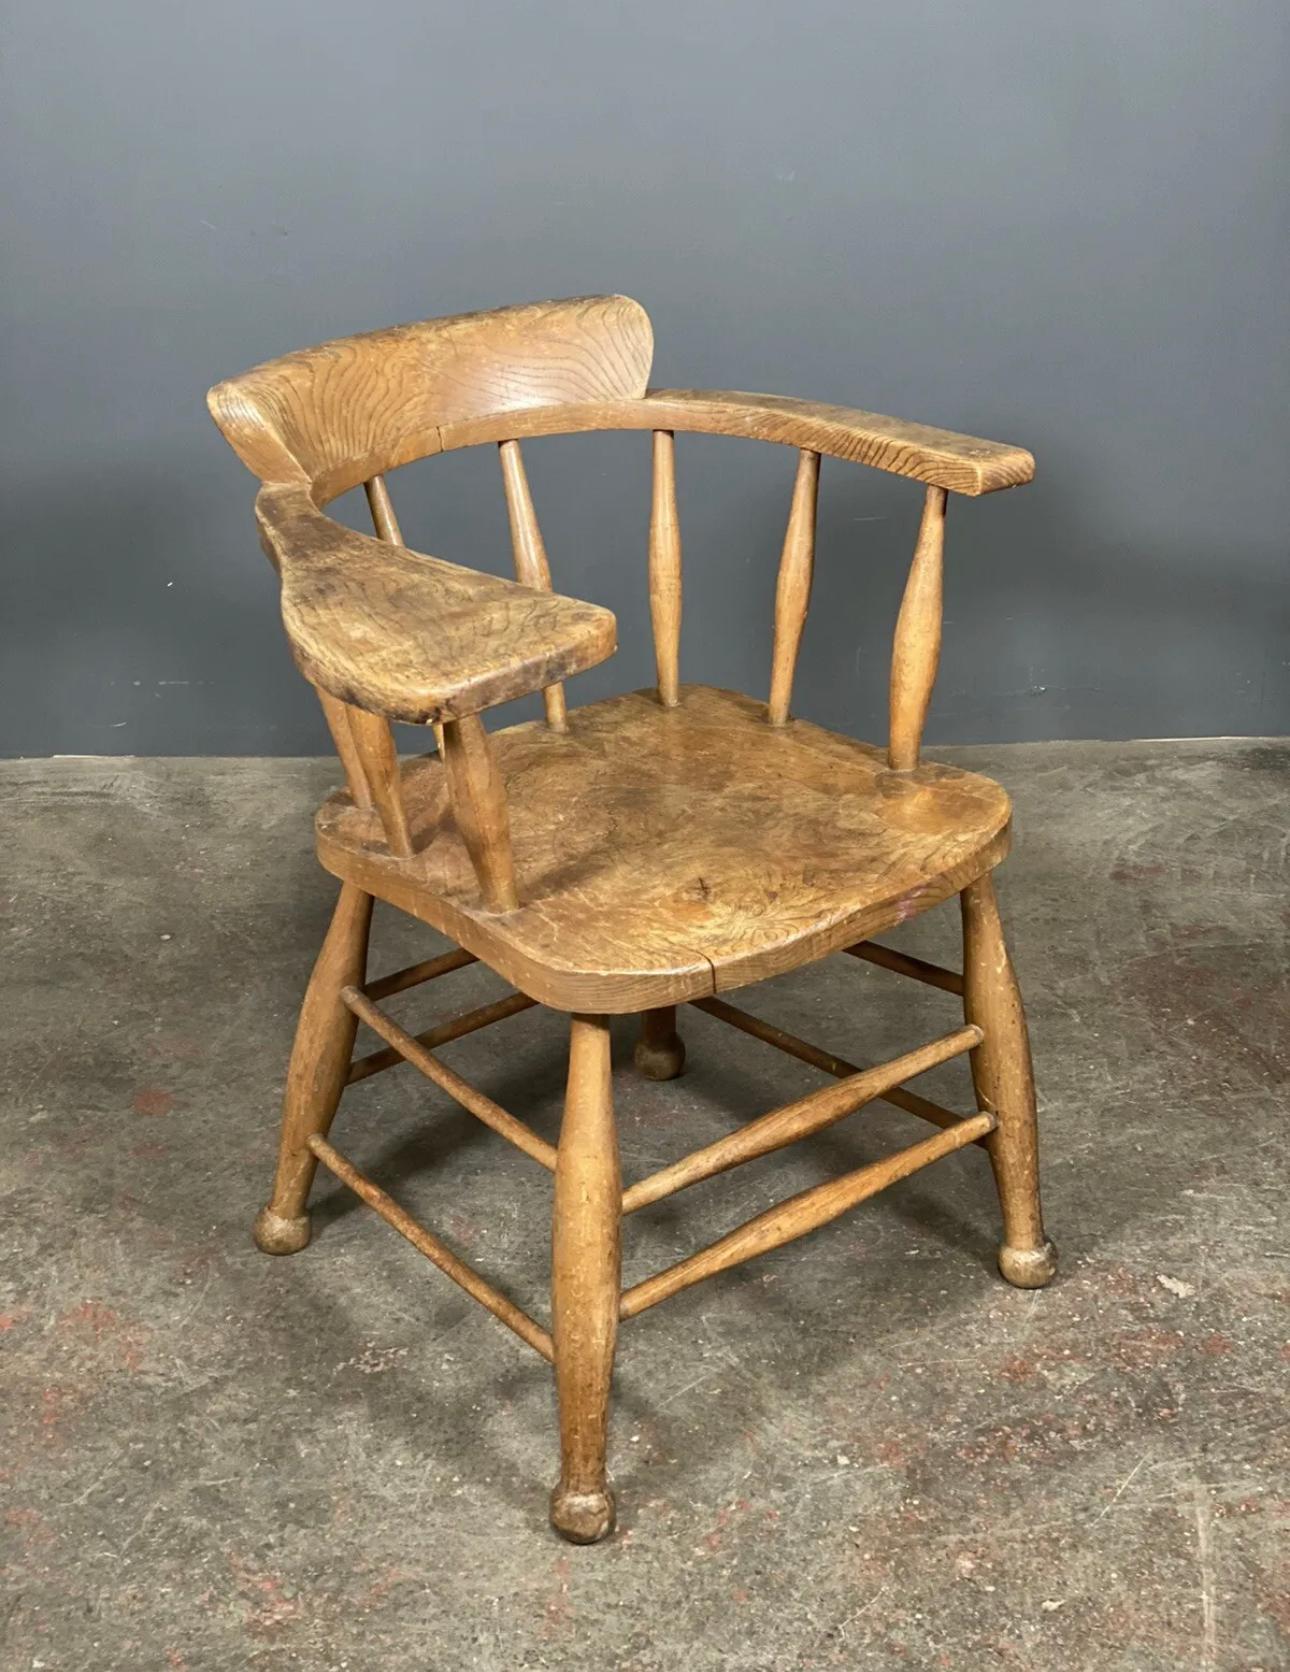 A rare chair dating to the early part of the 20th century. We think the chair was a teachers chair with the oversized arm acting as a bookrest. Made from a rich cut of elm the chair has a deep rich grain.  In good solid condition with some age